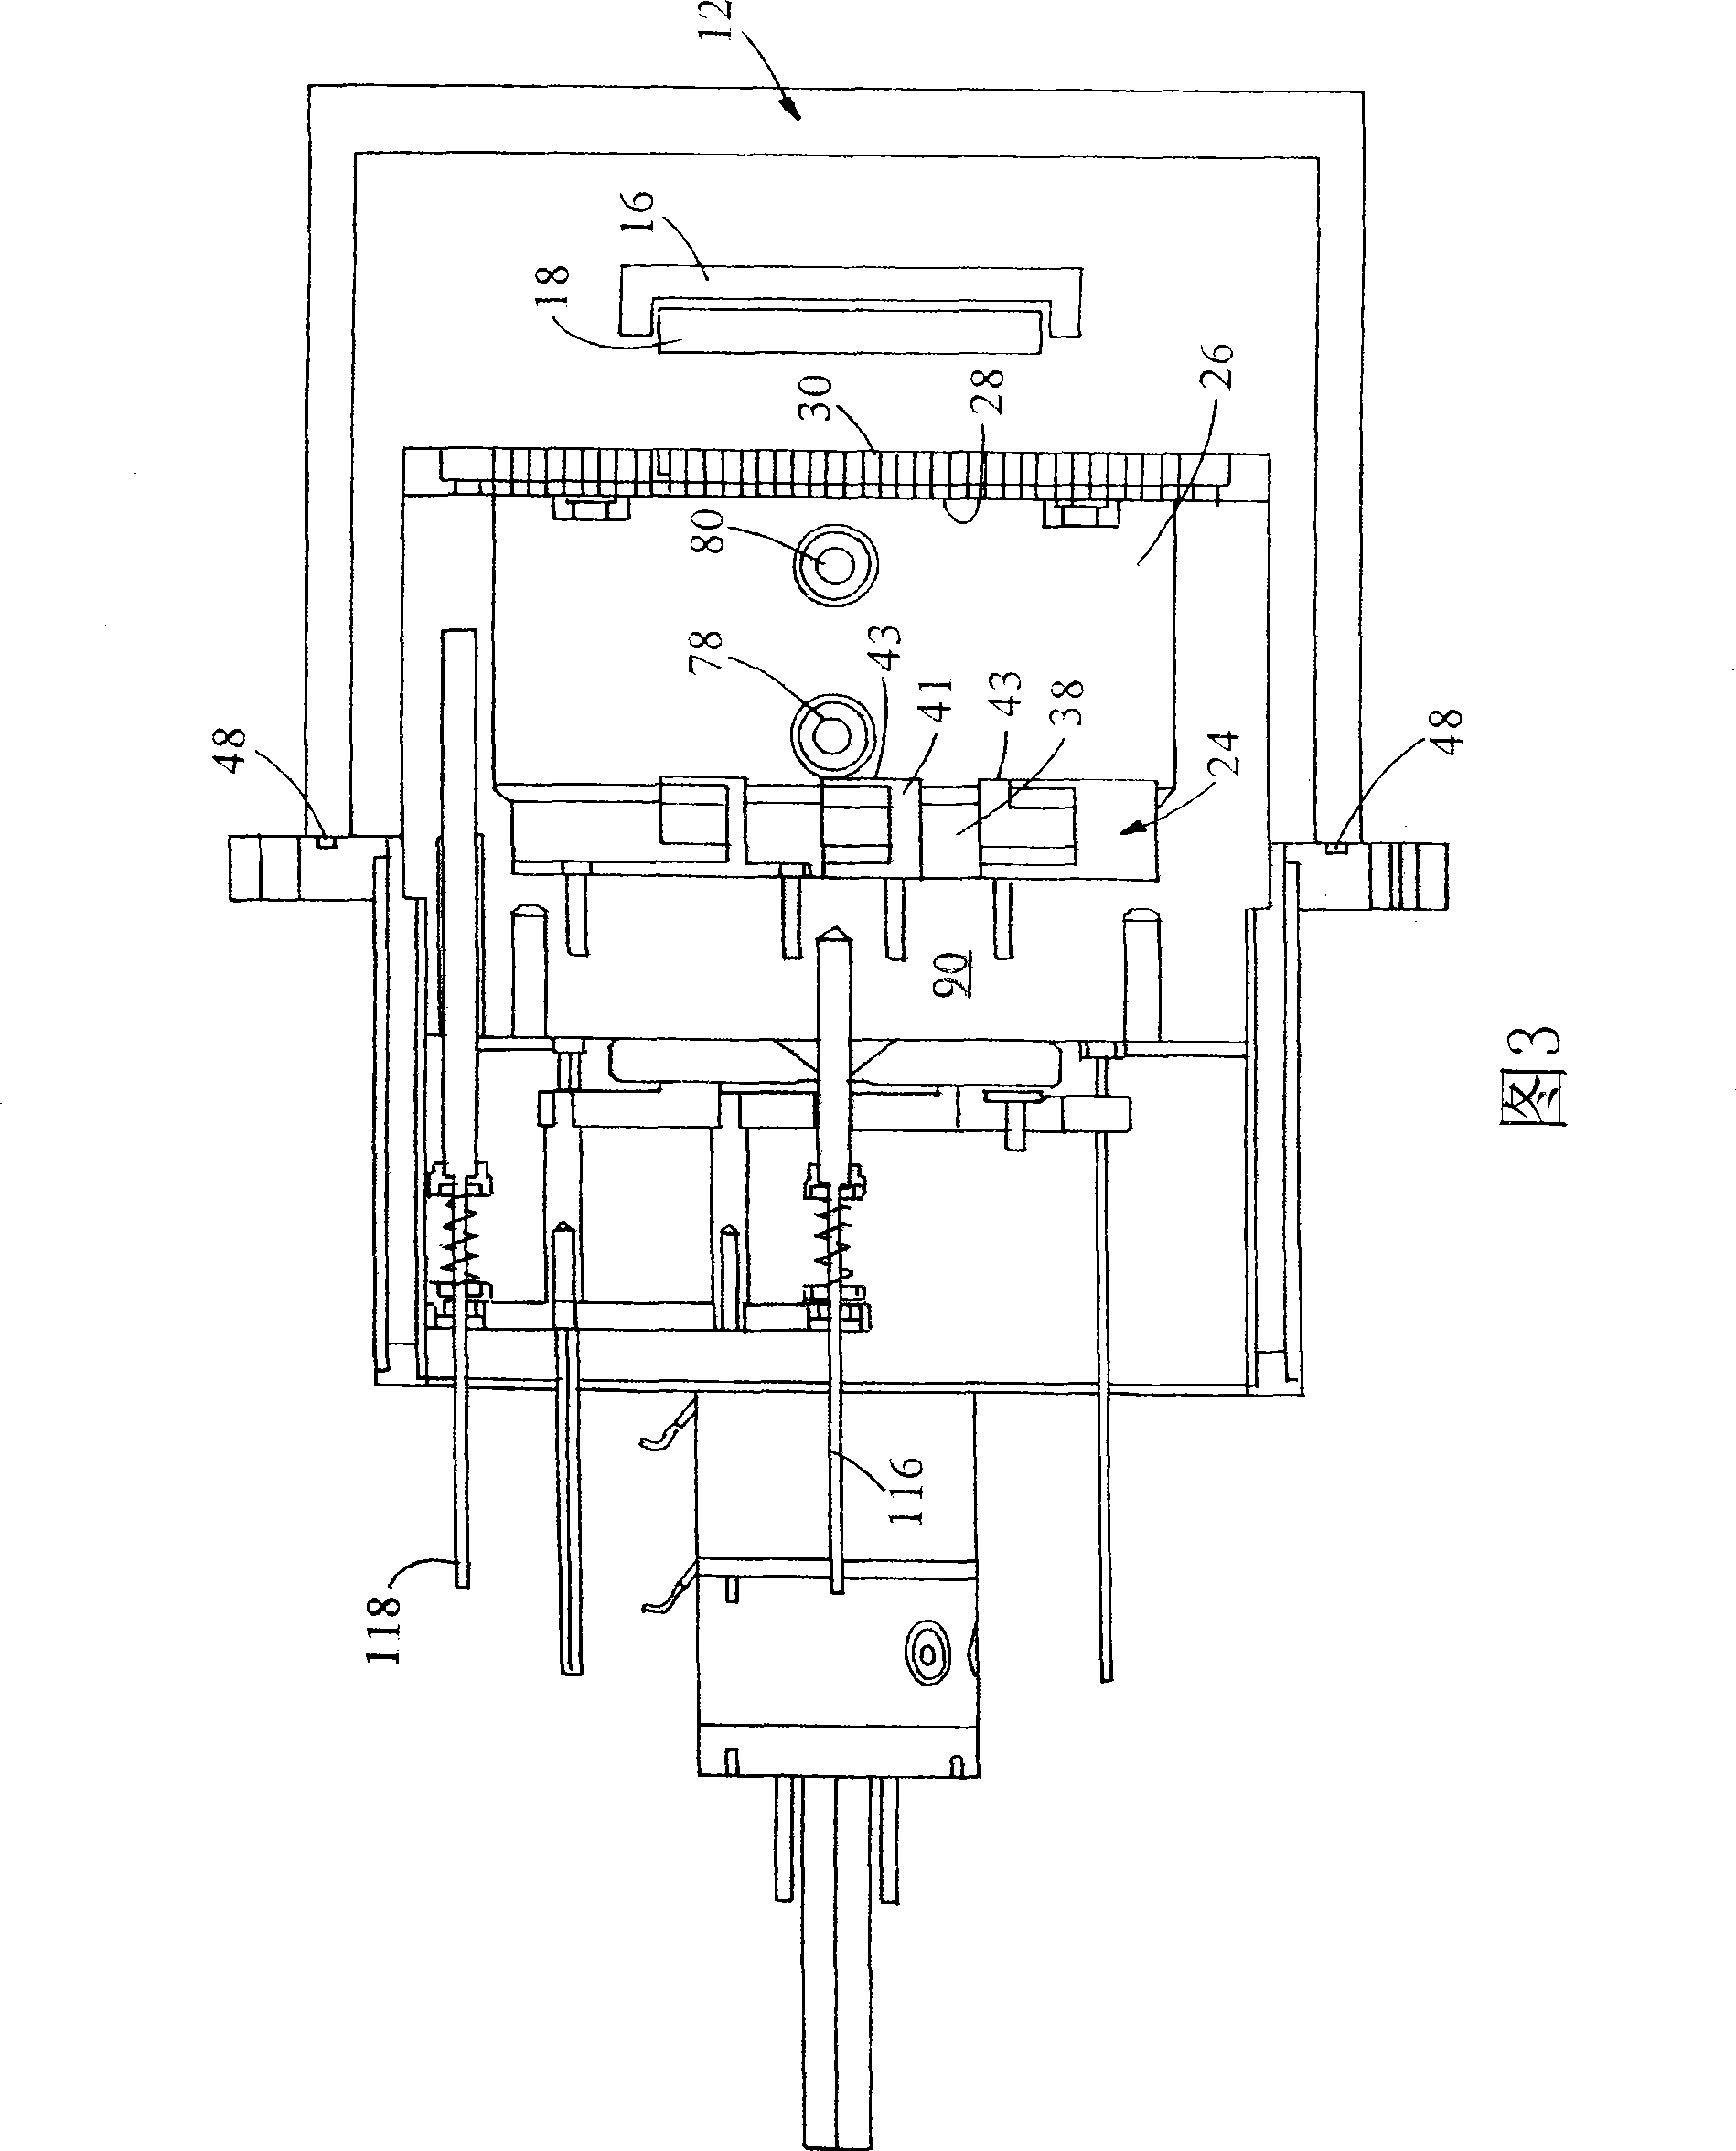 Method of and apparatus for monitoring flow of lubricant vapor forming lubricant coatings of magnetic disks